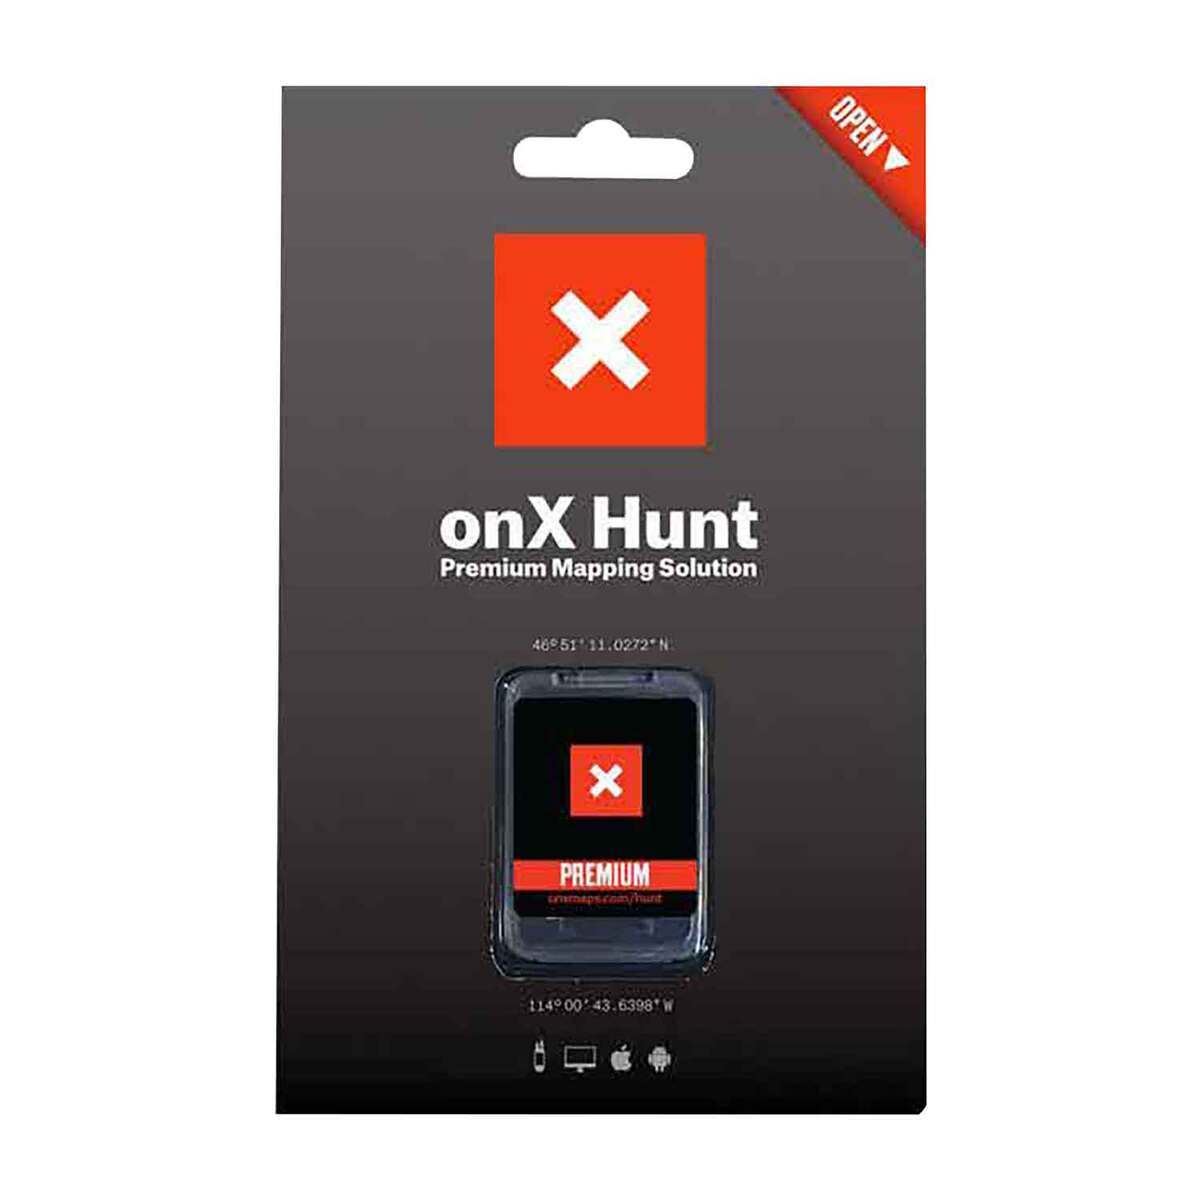 1 GPS Hunting App, Land Maps, Aerial Imagery & Tracking